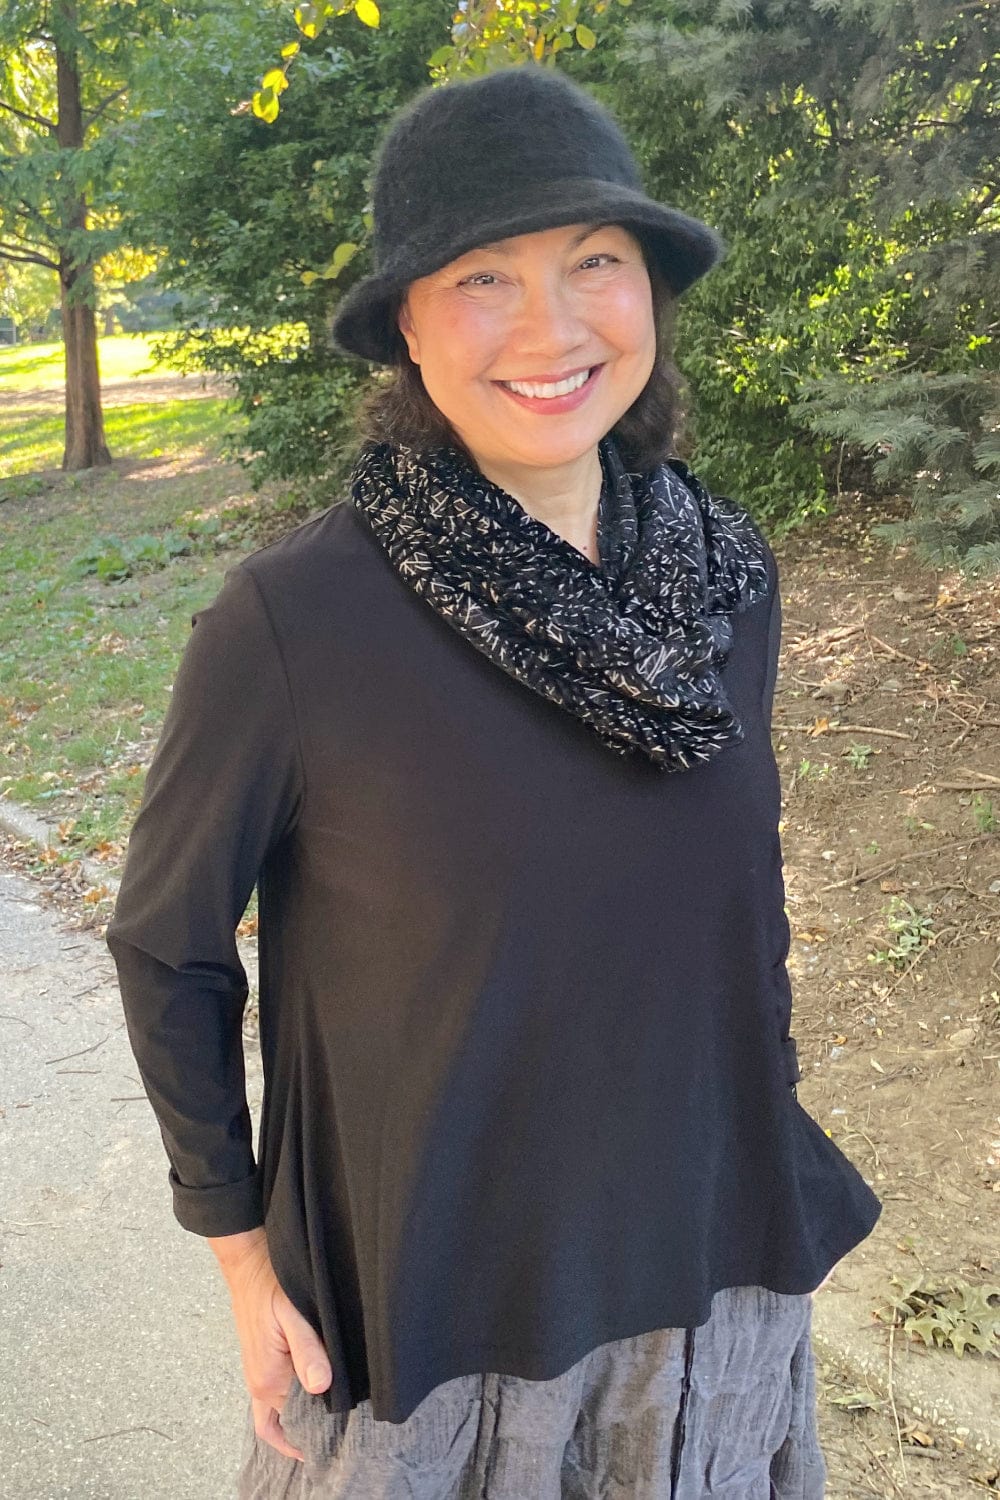 Basic black long sleeve tee styled with a velvet black and white scarf and angora hat.